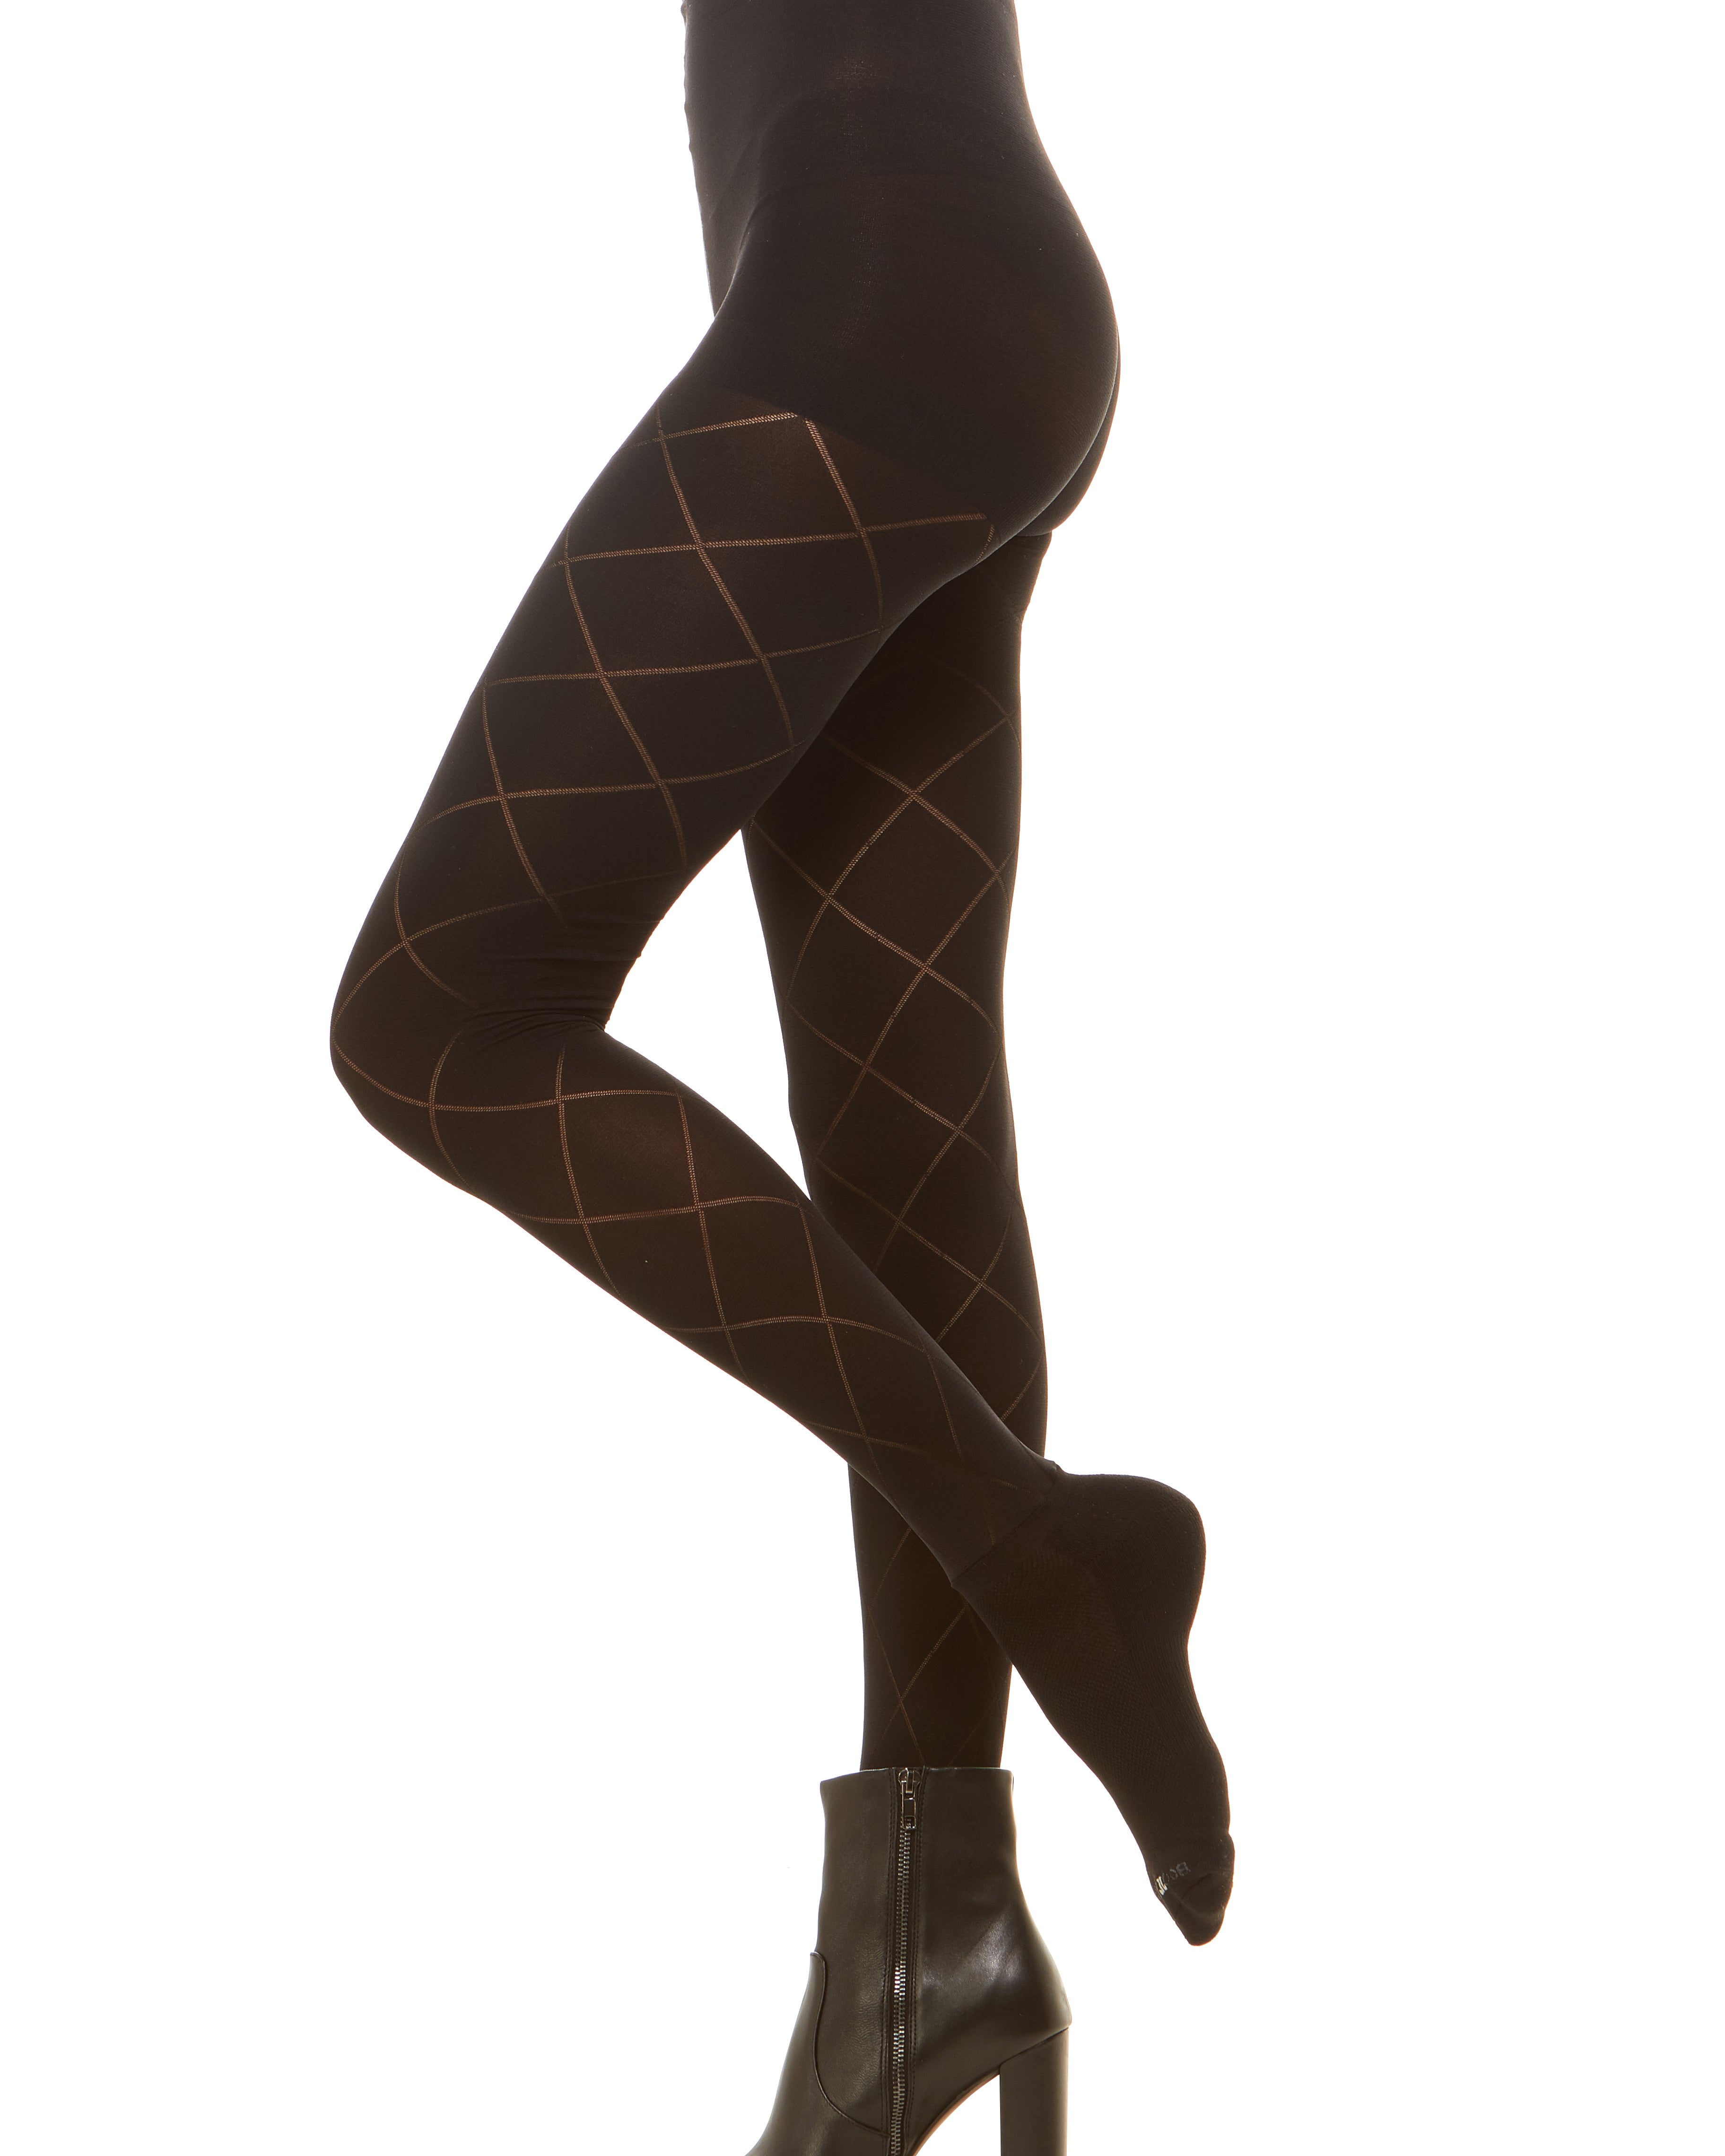 Premium semi opaque women’s tights in a diamond pattern with attached performance athletic socks and tummy control waistband 